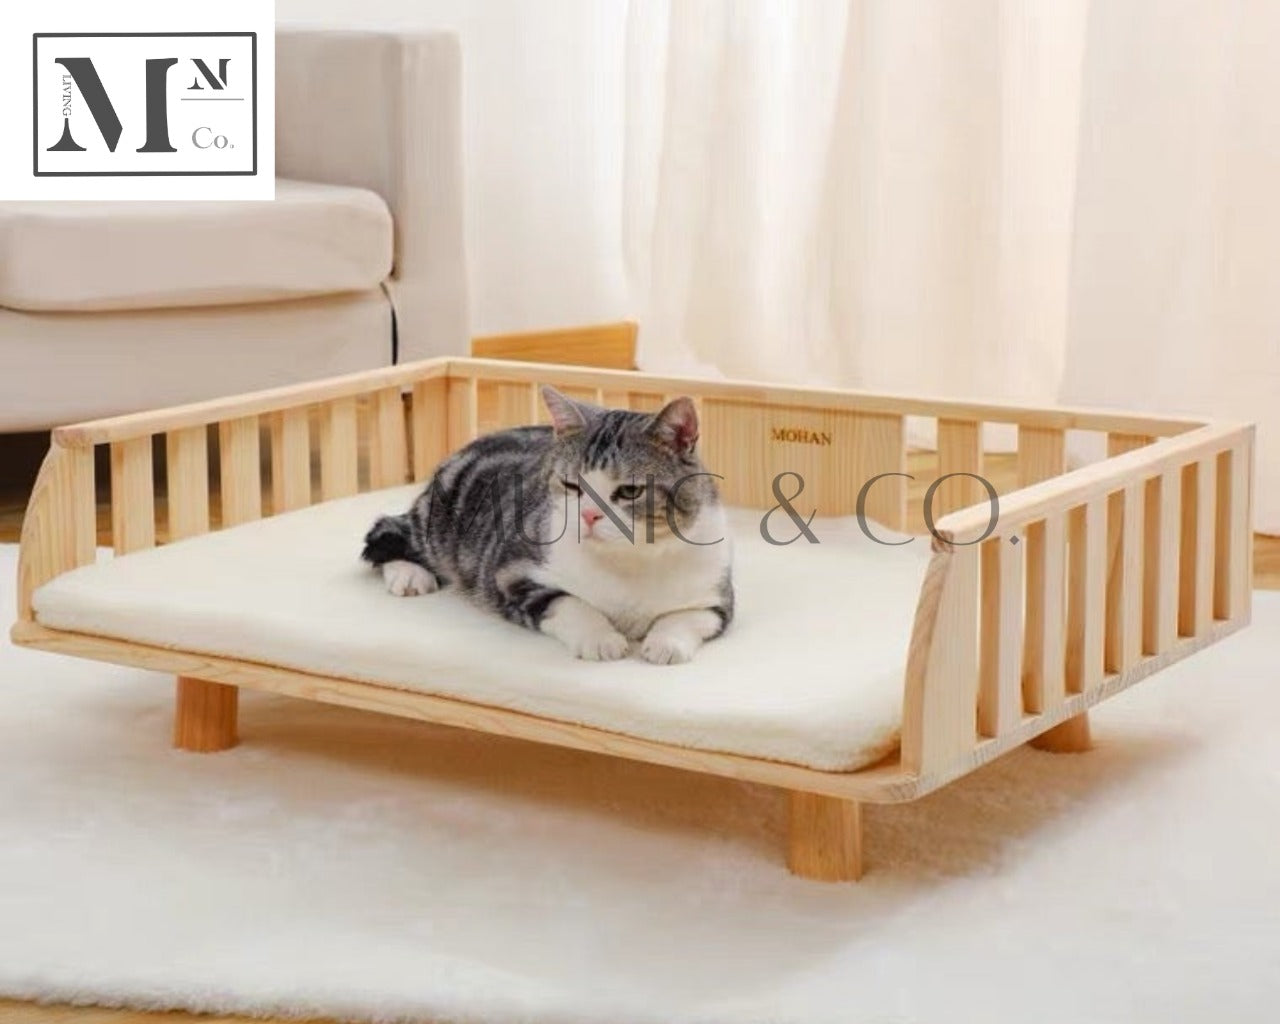 pawspals nonopets natural wooden bed for dogs and cats.  pets wooden bed